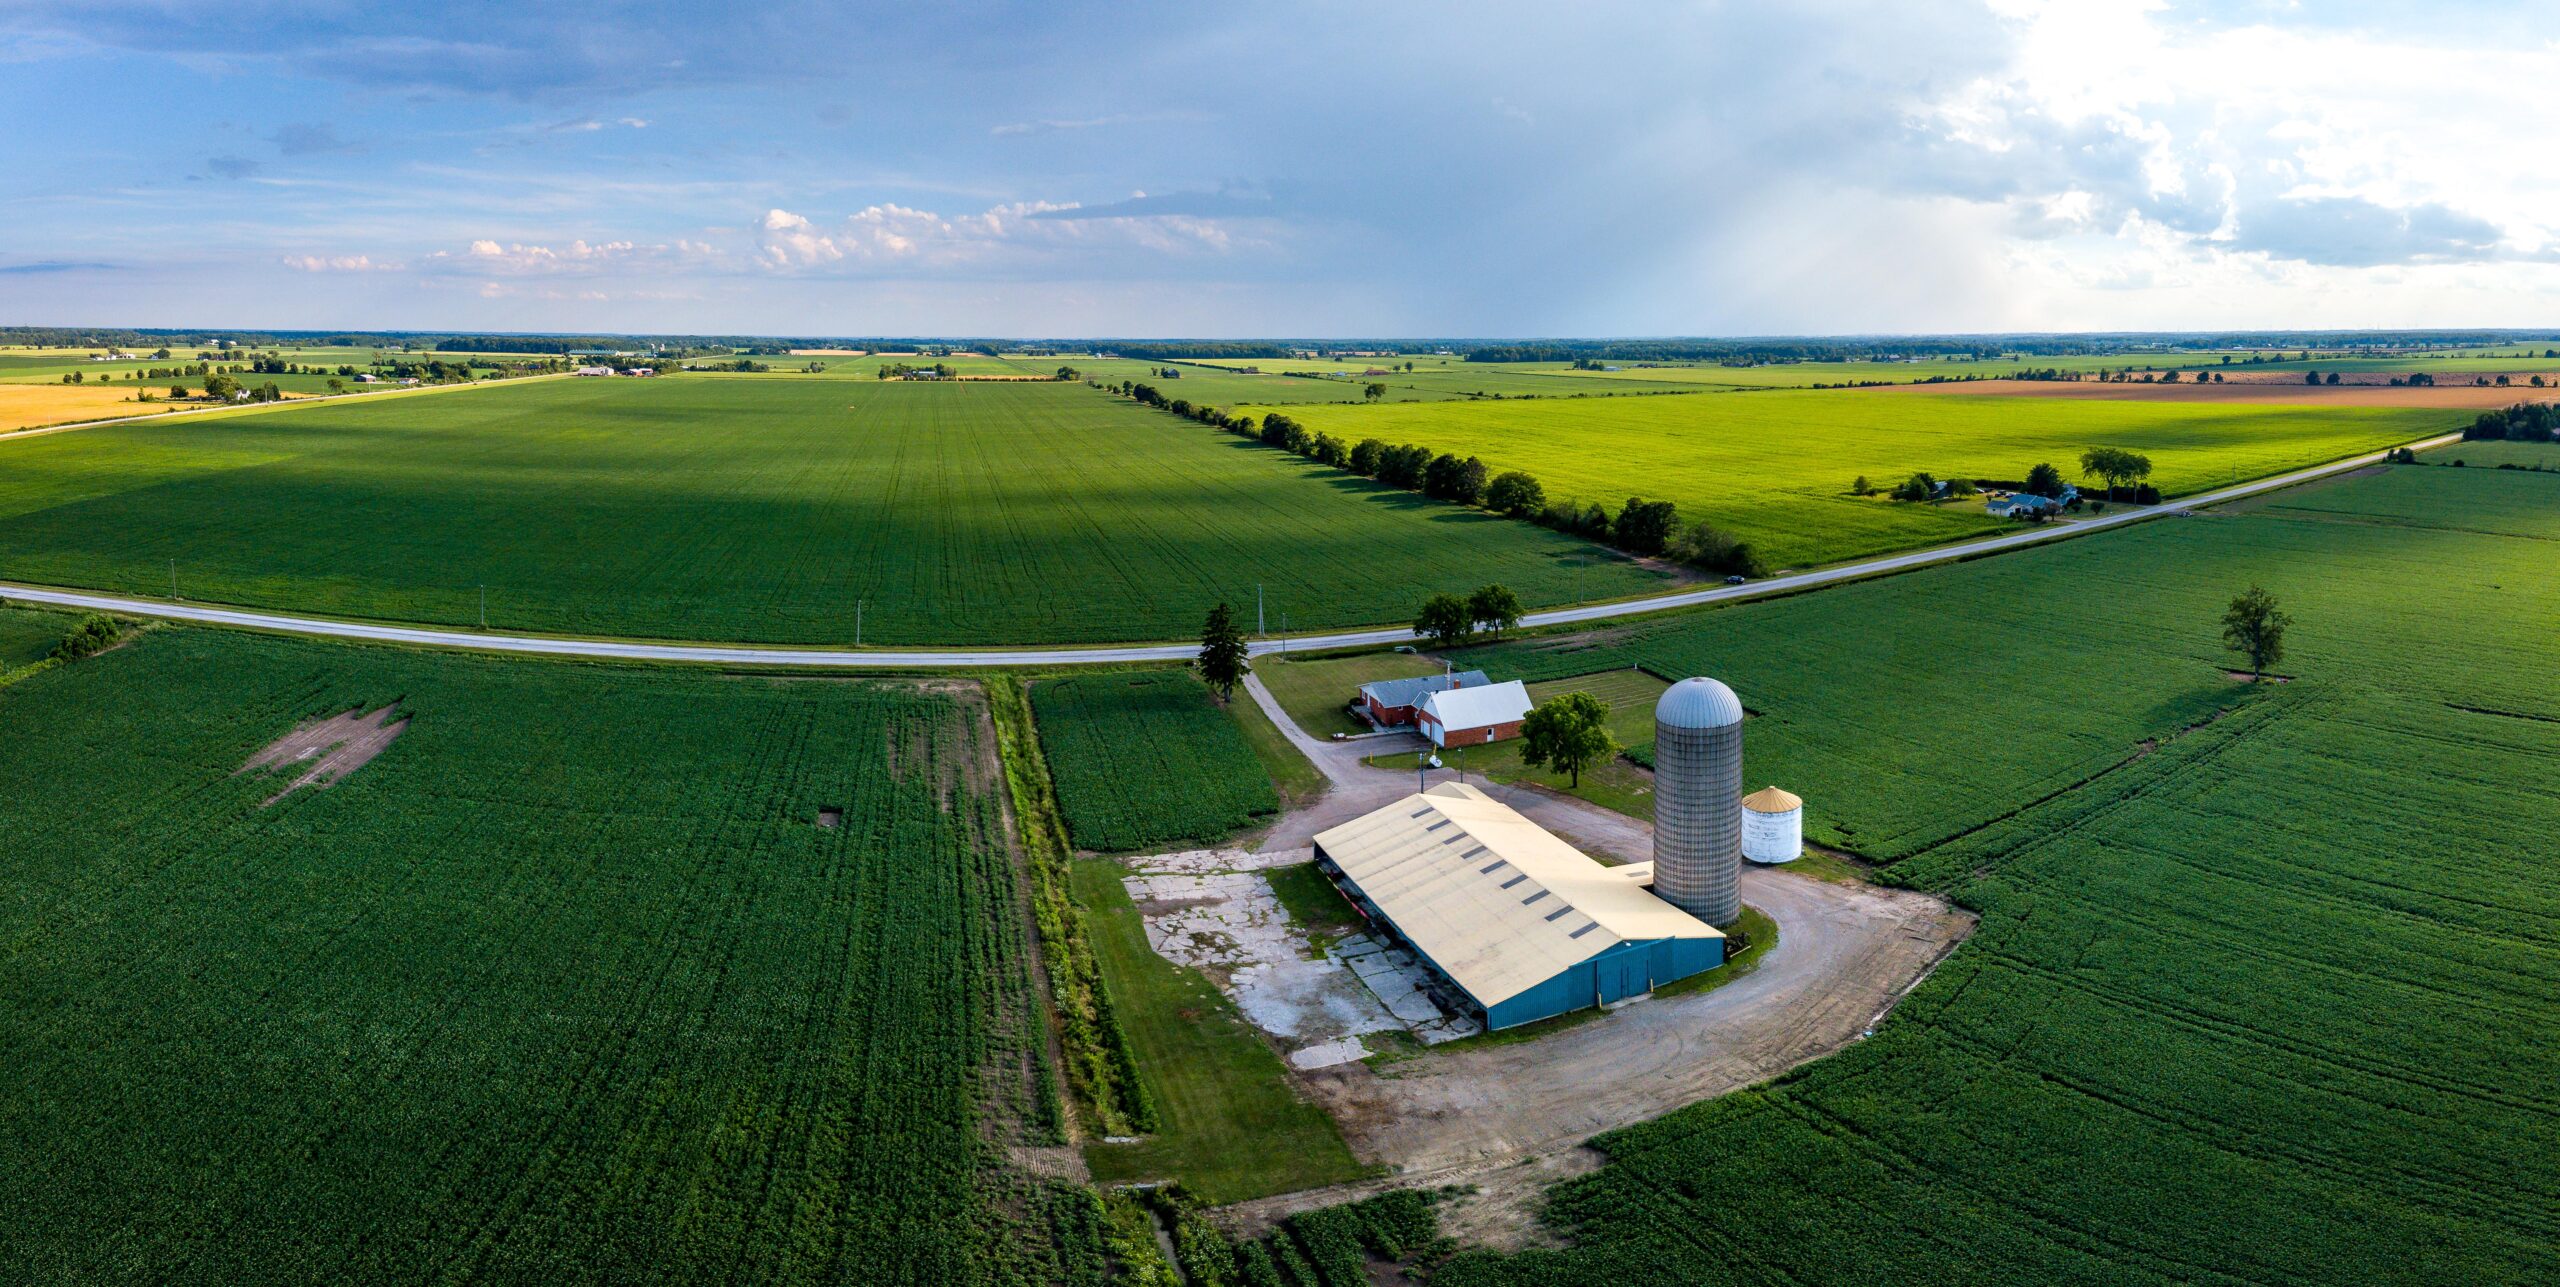 Aerial view of a lush, expansive farmland with neat green fields under a clear sky. A farmstead with a red barn, silo, and large agricultural buildings sits near a winding road, embodying the thriving agricultural landscape of Ontario.